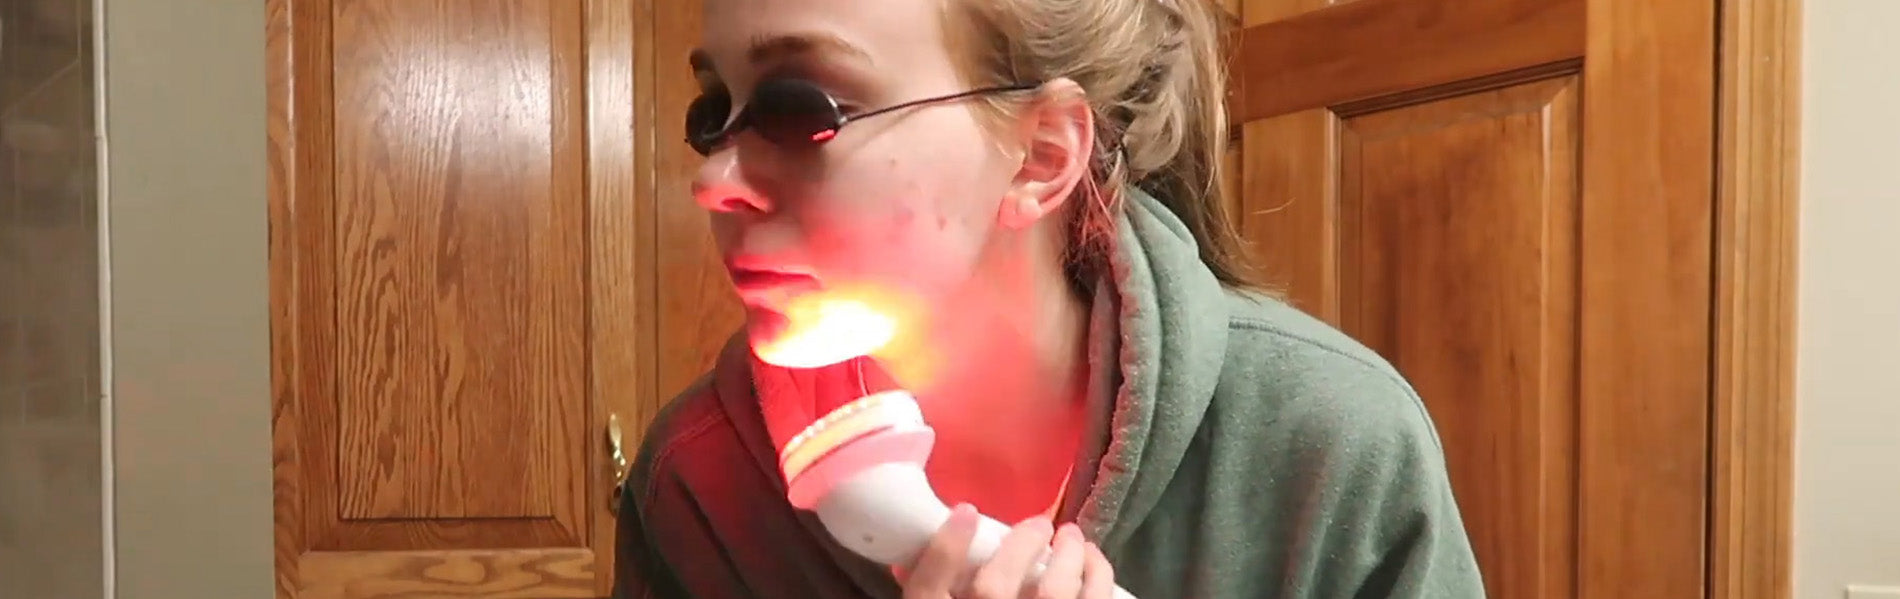 Natalie Howard’s Journey With Project E Beauty Red LED Light Therapy